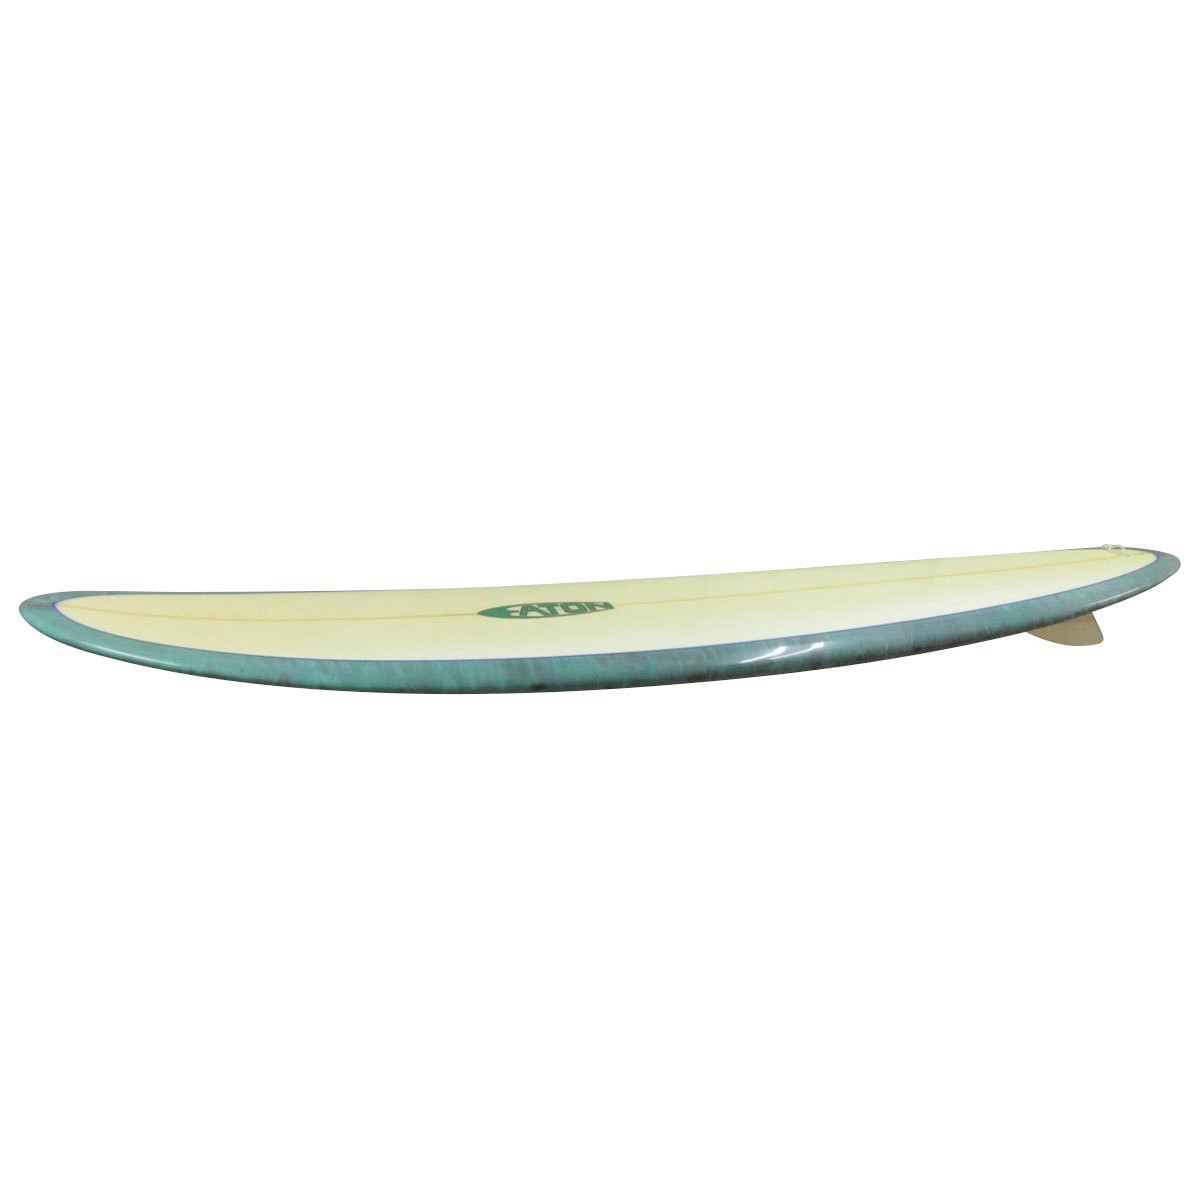 EATON SURFBOARDS / 7`10 Bonzer Shaped By Mike Eaton